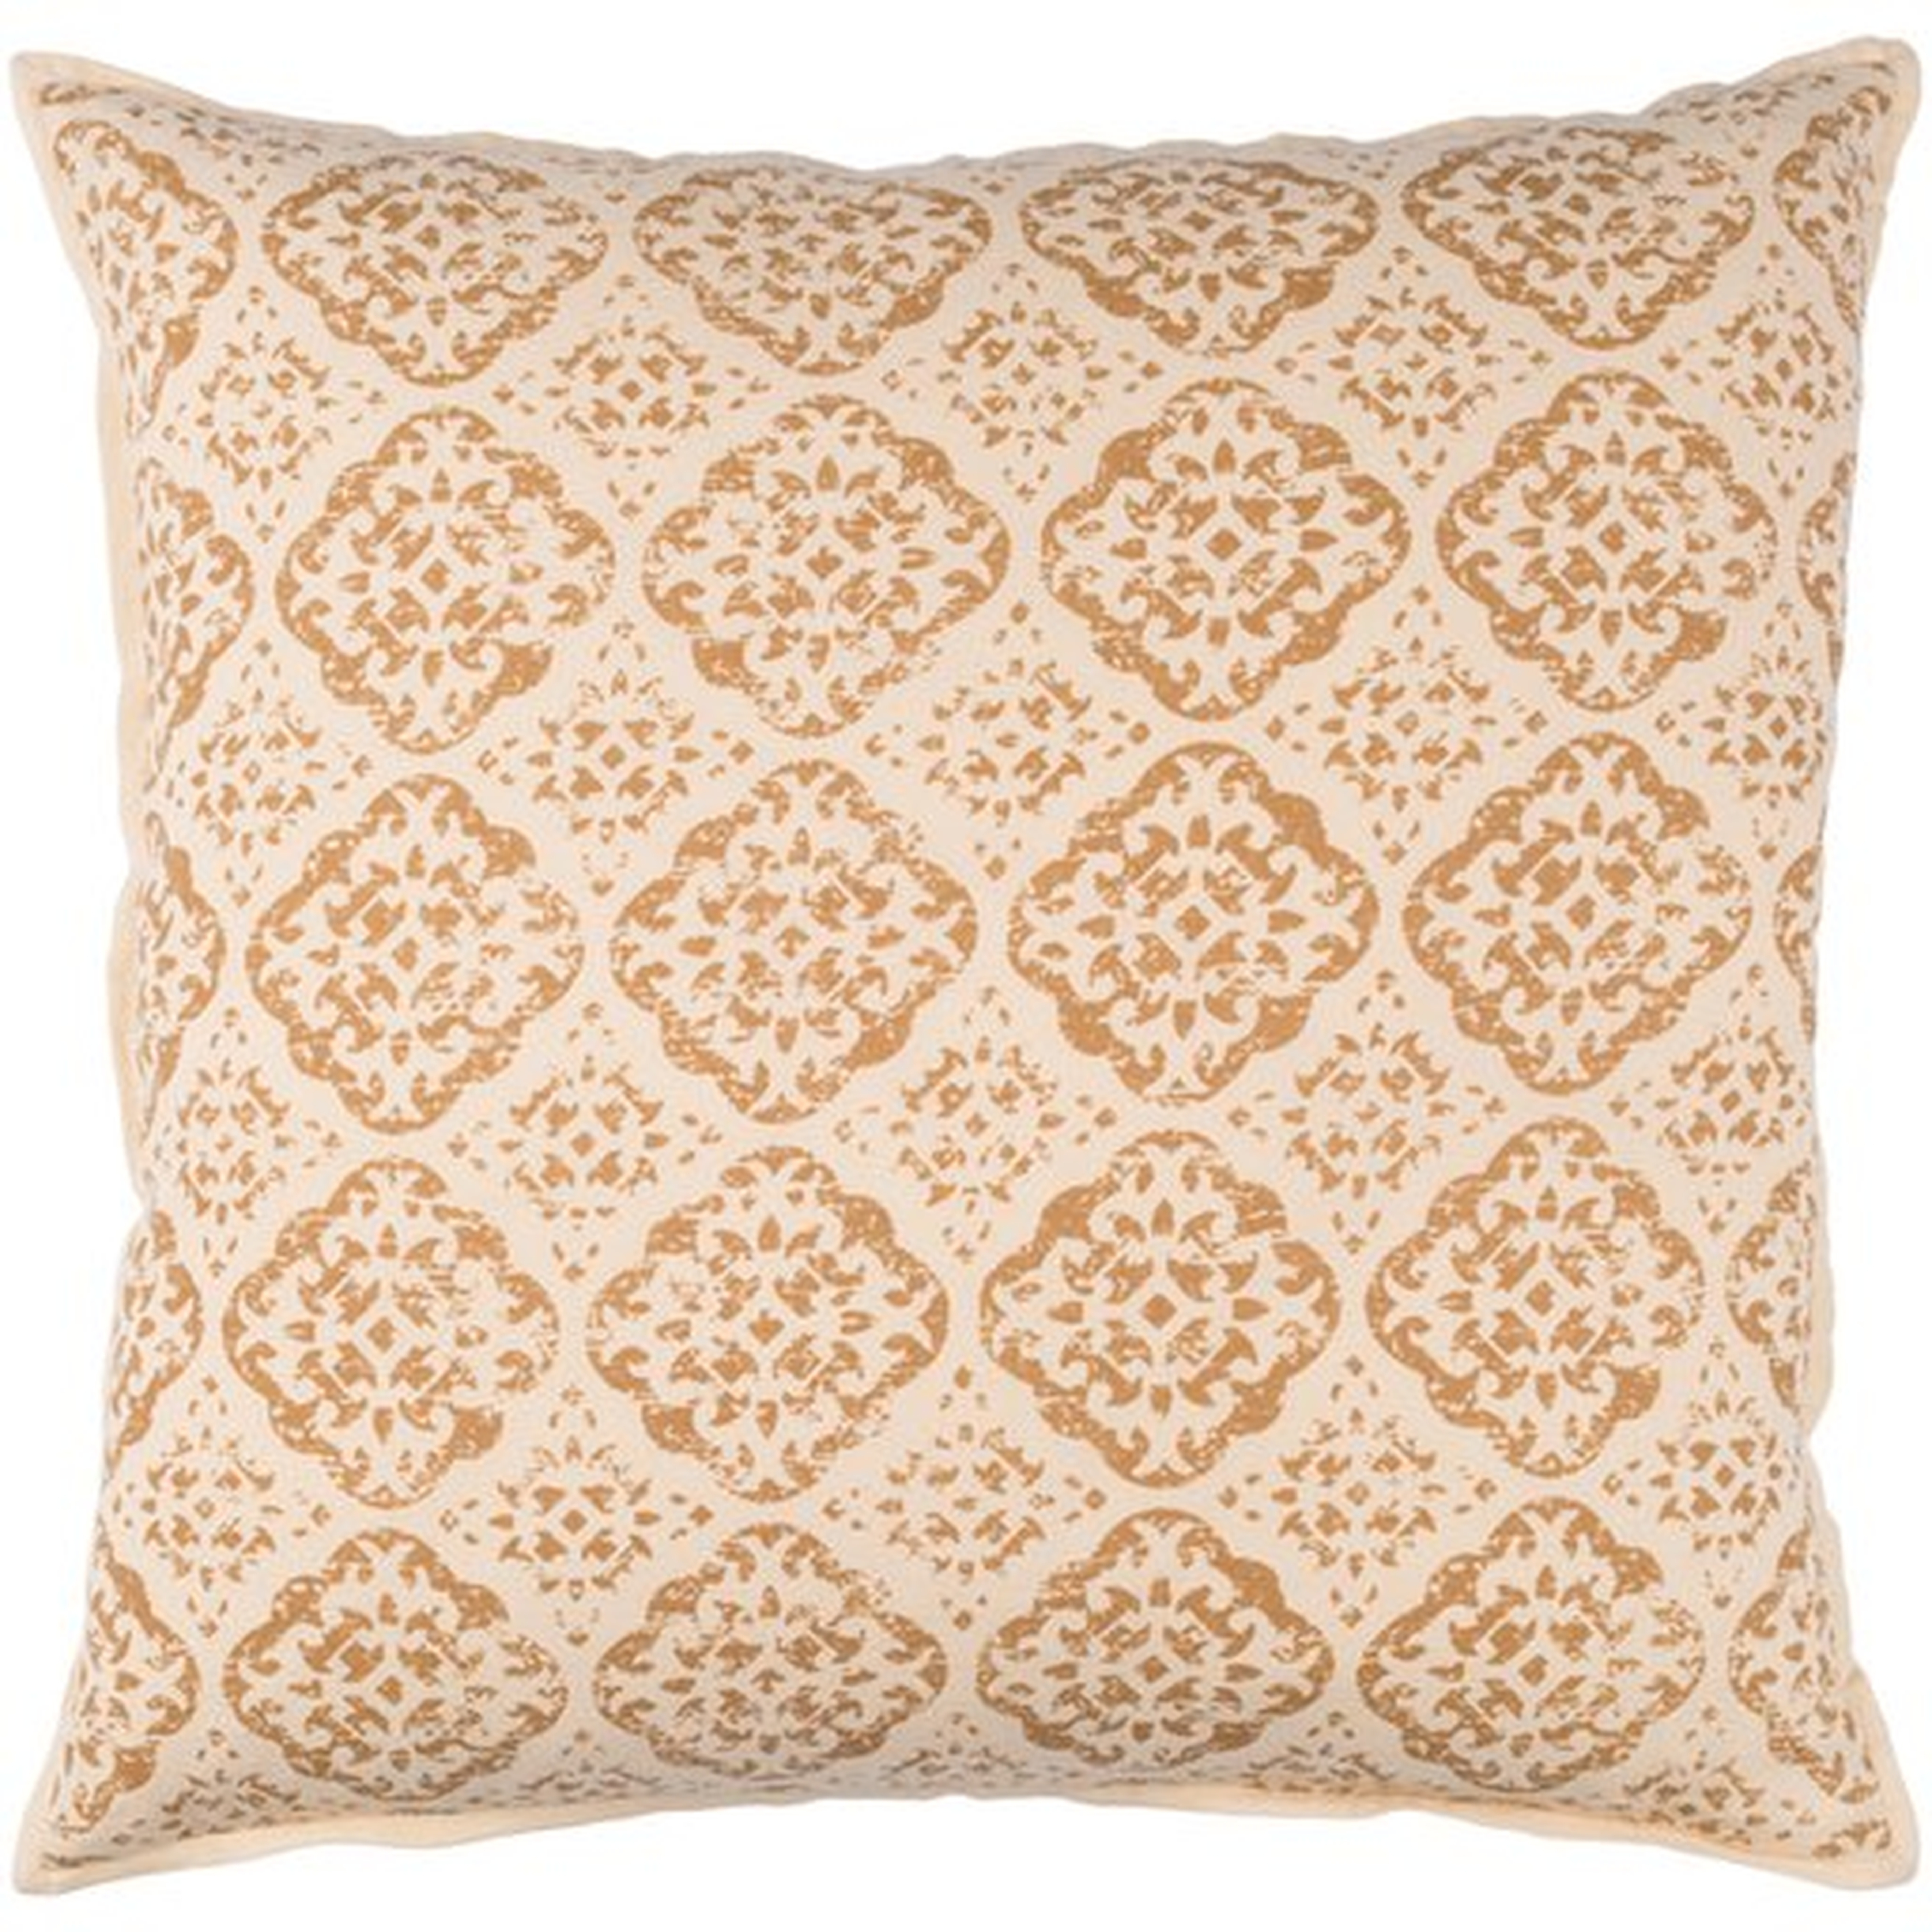 D'Orsay Throw Pillow, 20" x 20", with poly insert - Surya